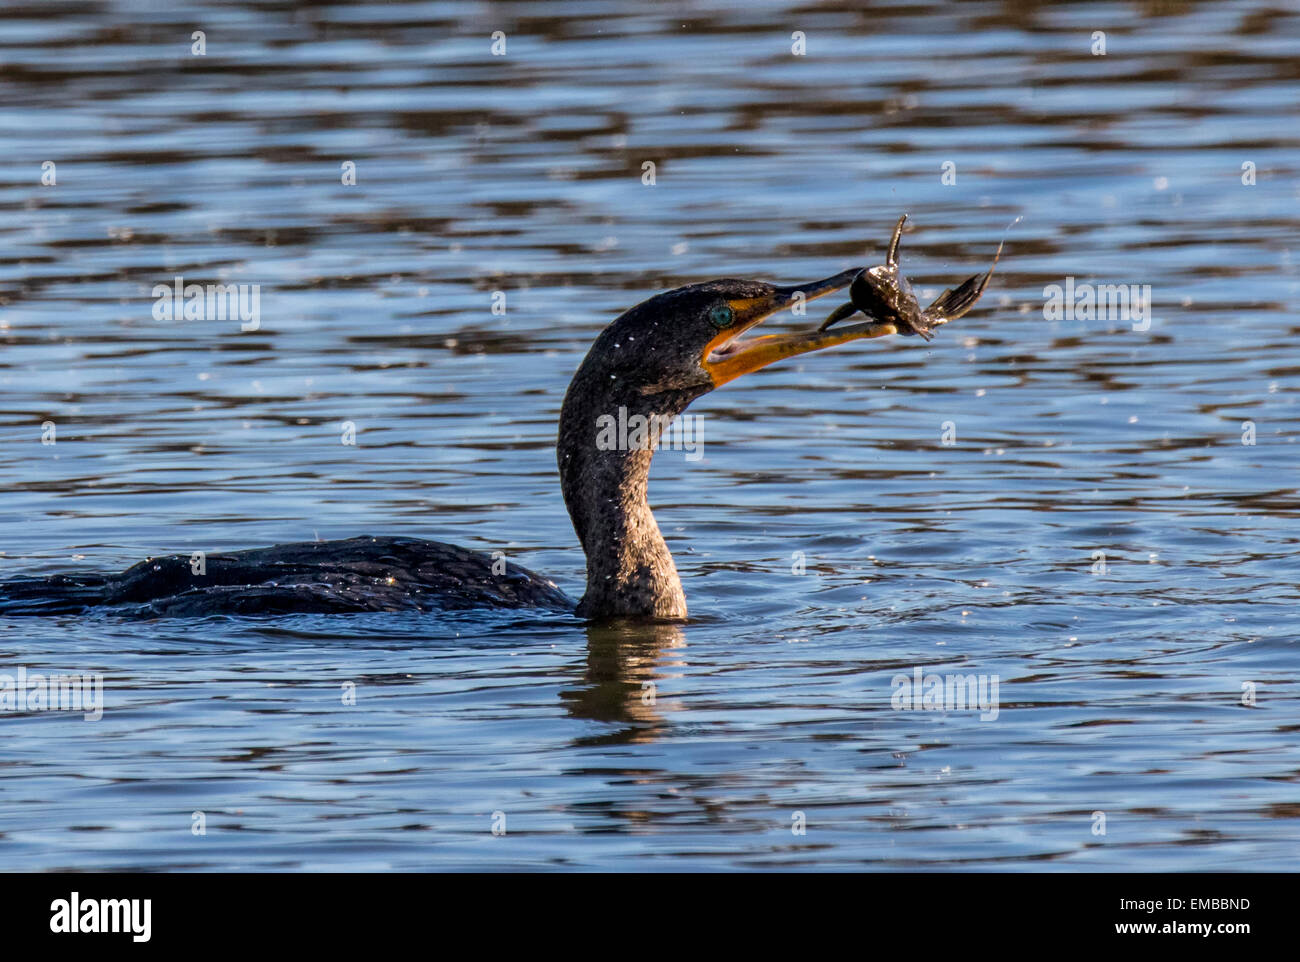 DOUBLE-CRESTED CORMORANT (Phalacrocorax auritus) swimming and fishing in small lake Stock Photo